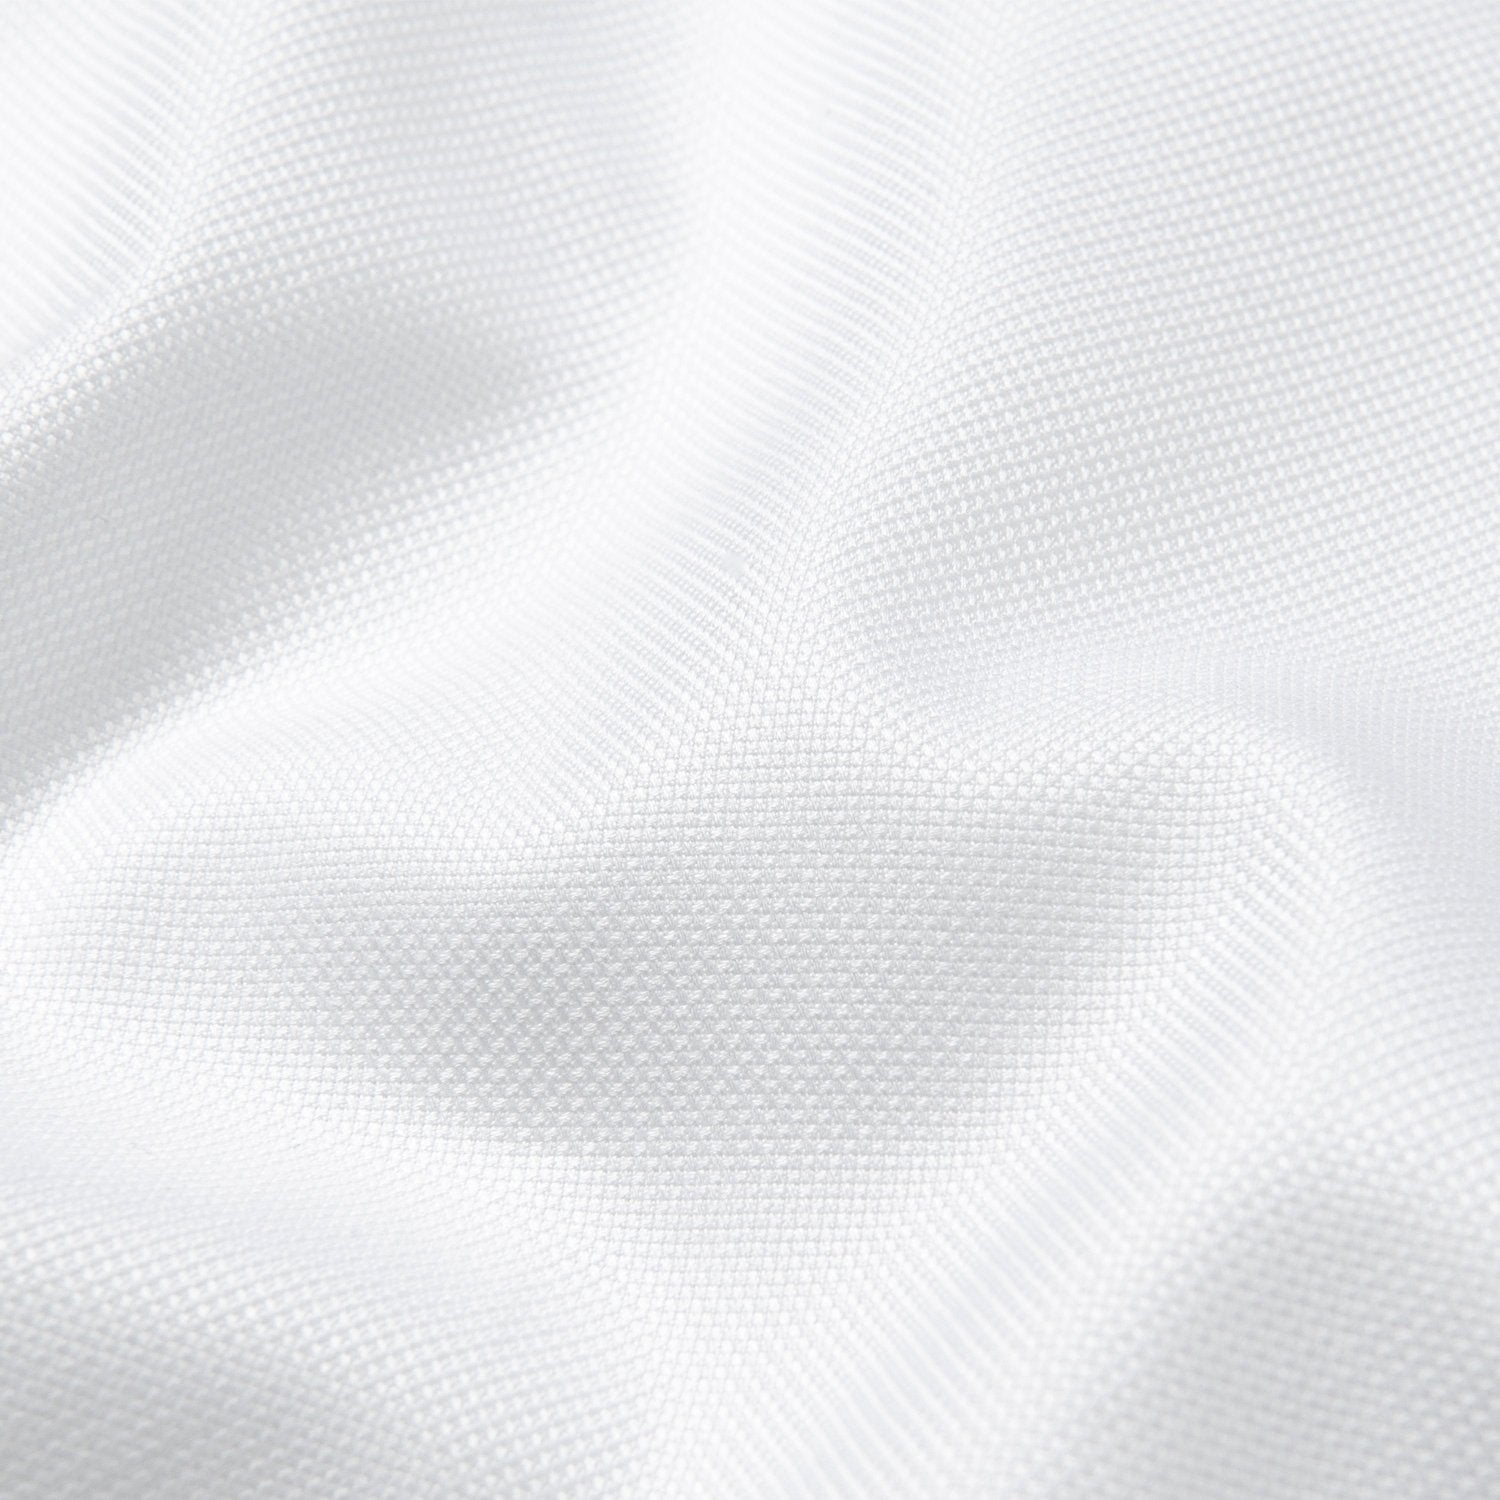 'Terry' Beyond Non-Iron® Royal Oxford Cotton Dress Shirt with Button Down Collar in White by Batton